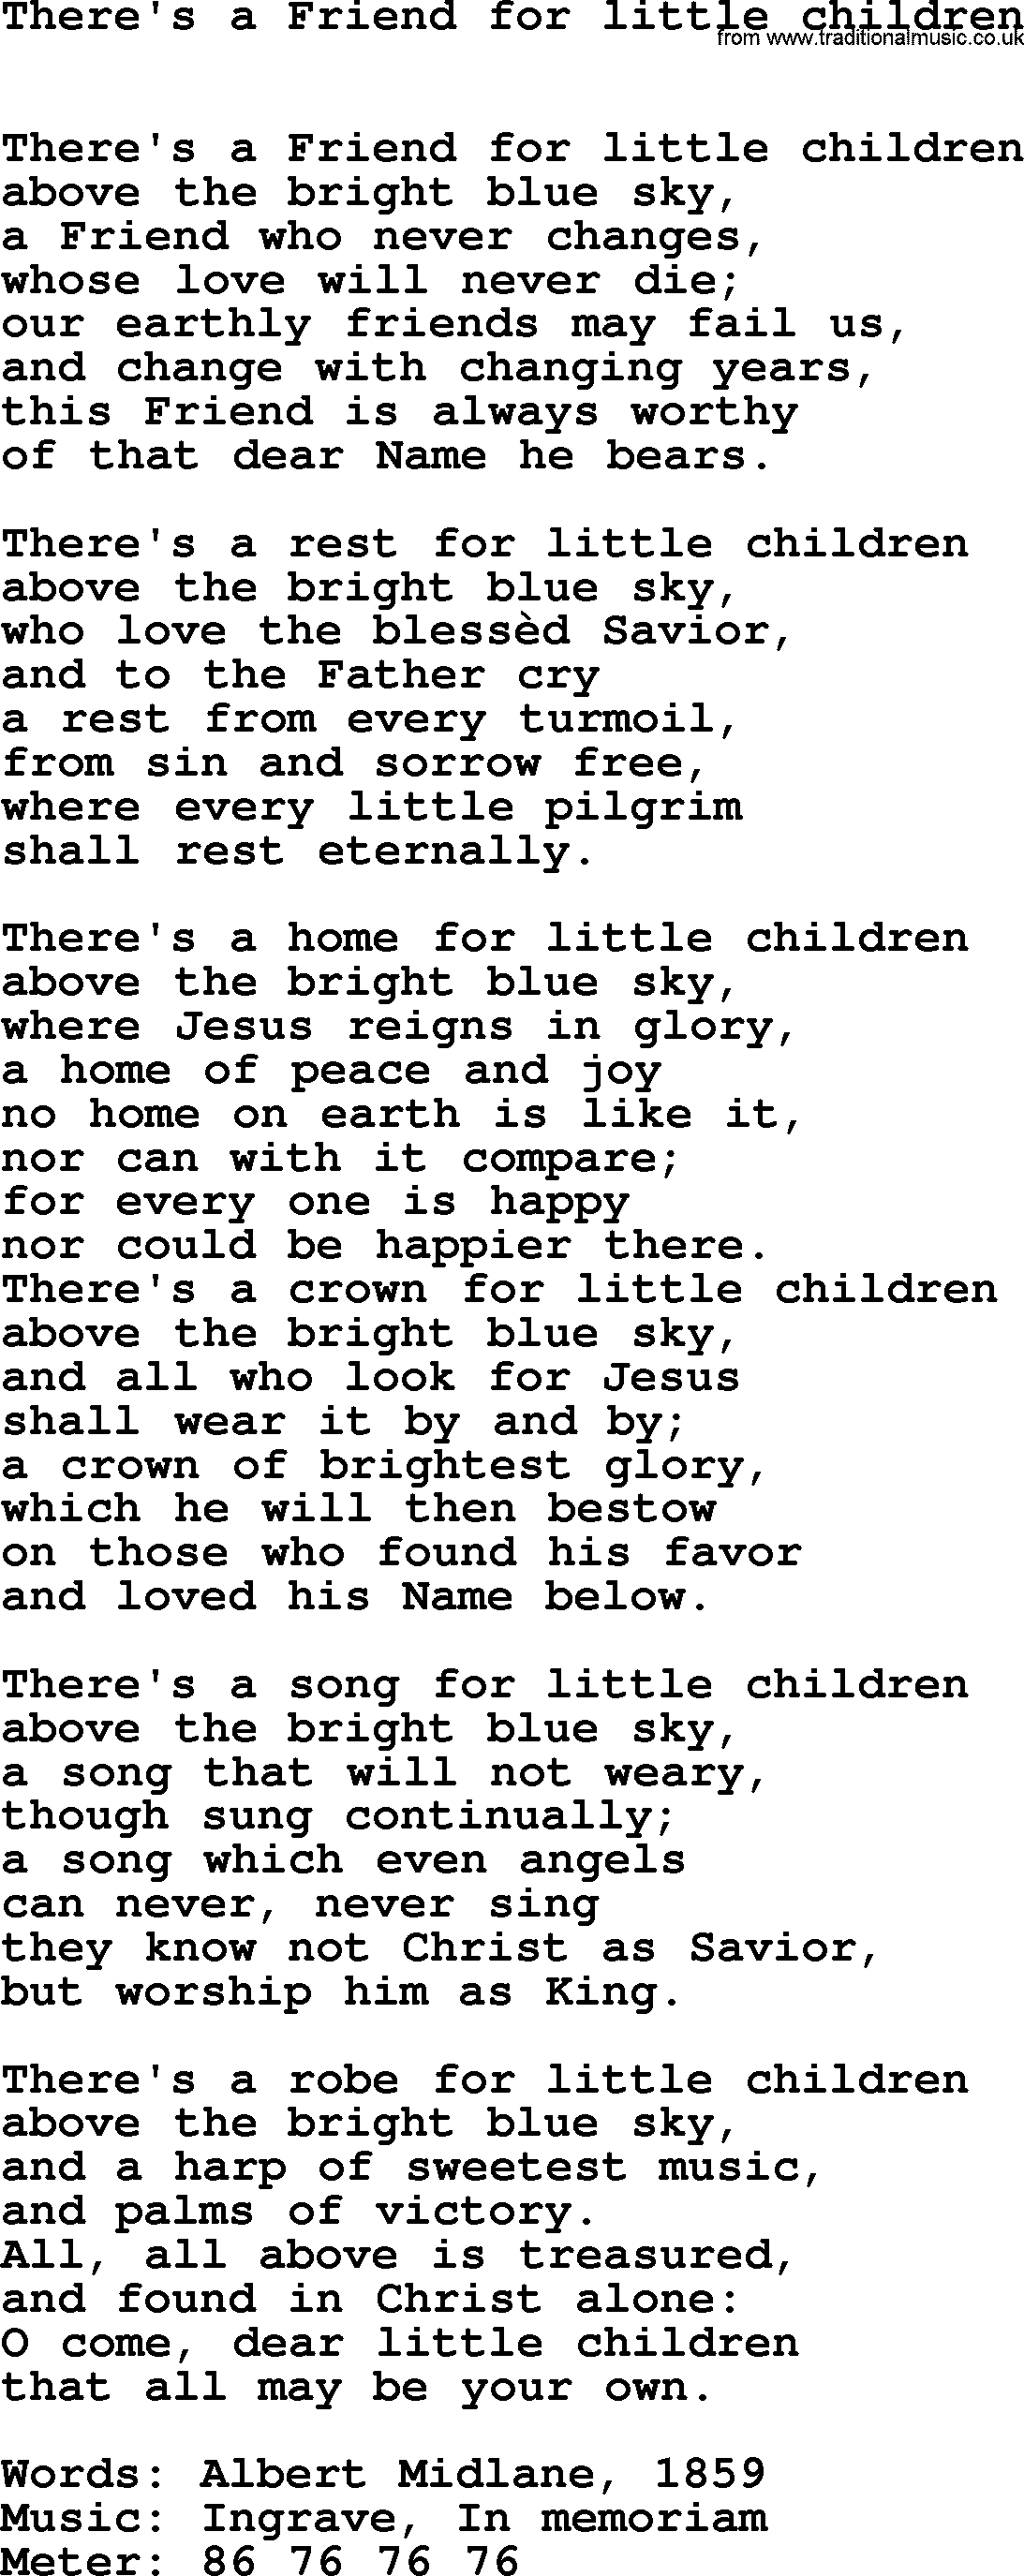 Book of Common Praise Hymn: There's A Friend For Little Children.txt lyrics with midi music